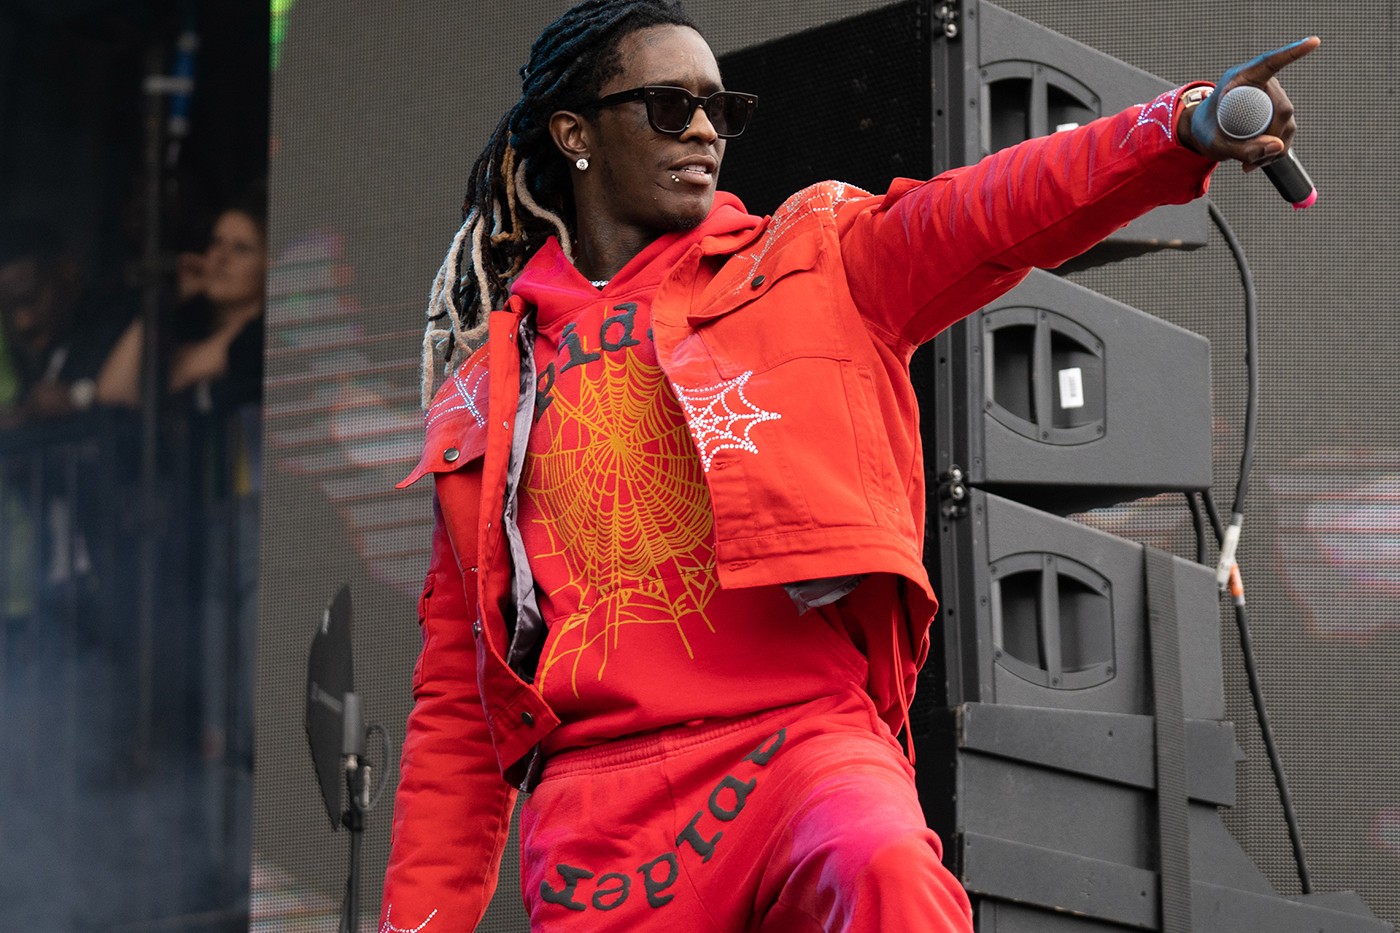 Listen to Young Thug's New Song 'Personal'